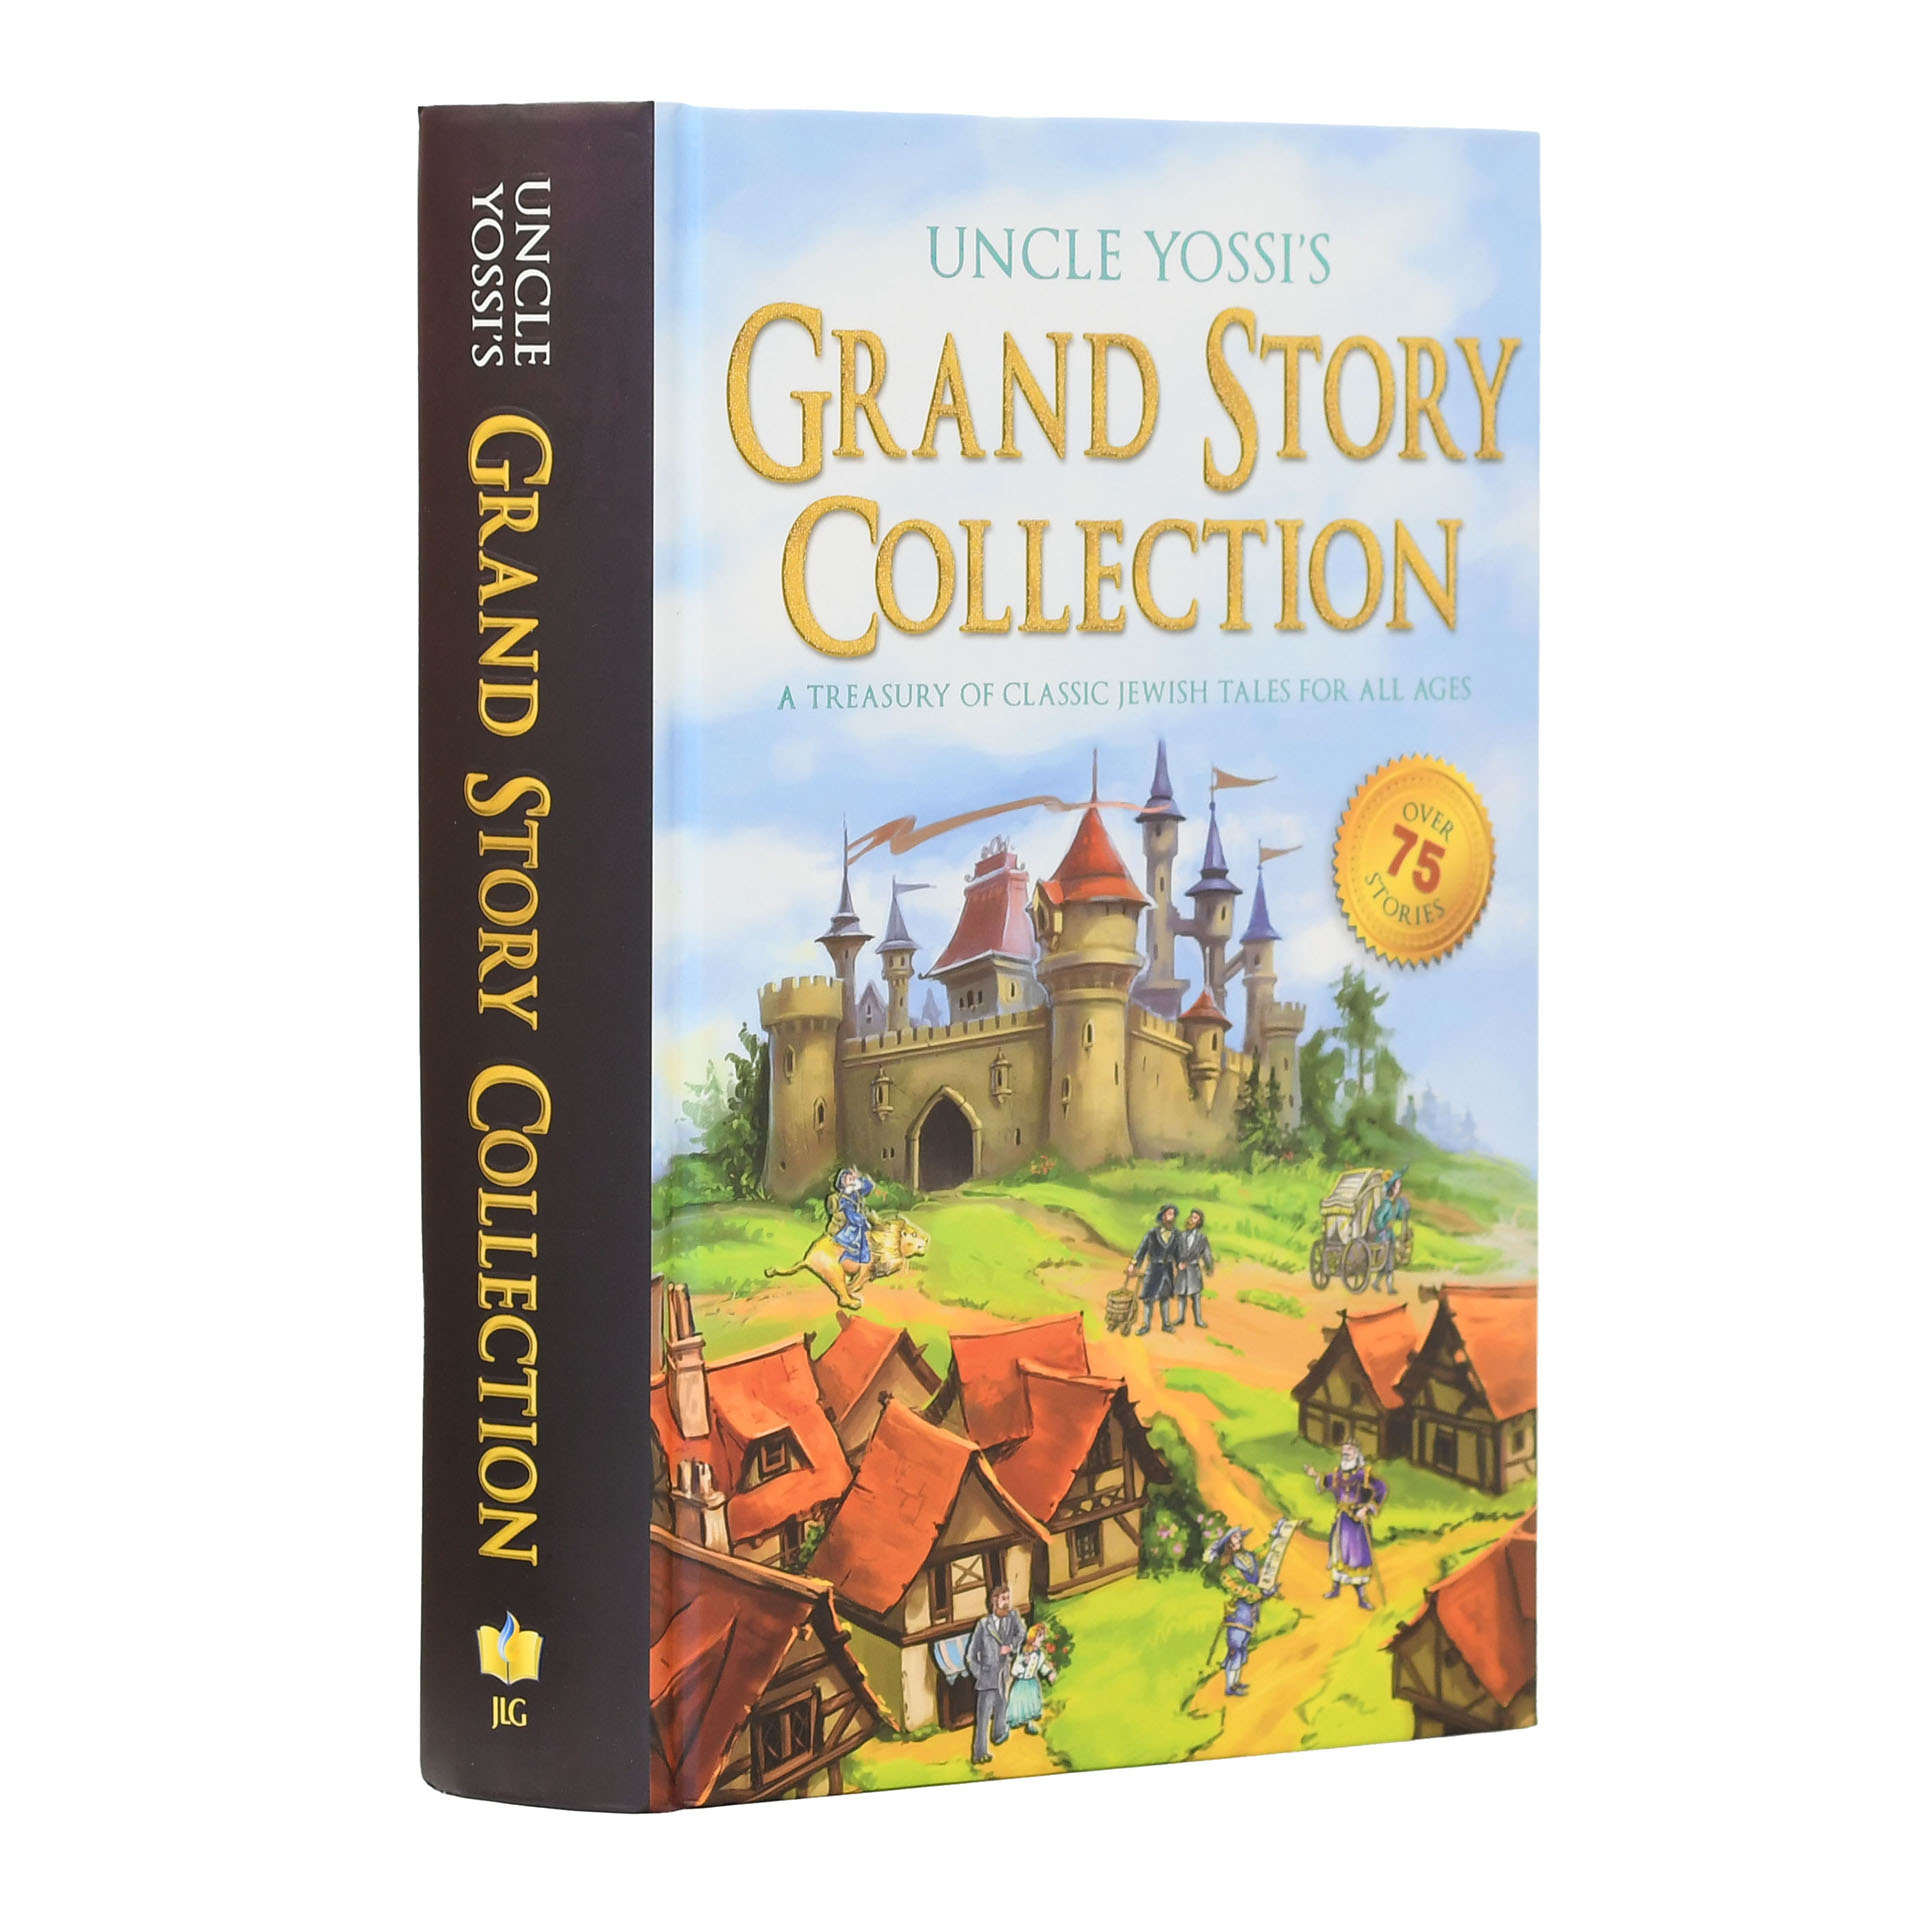 UNCLE YOSSIS GRAND STORY COLLECTION